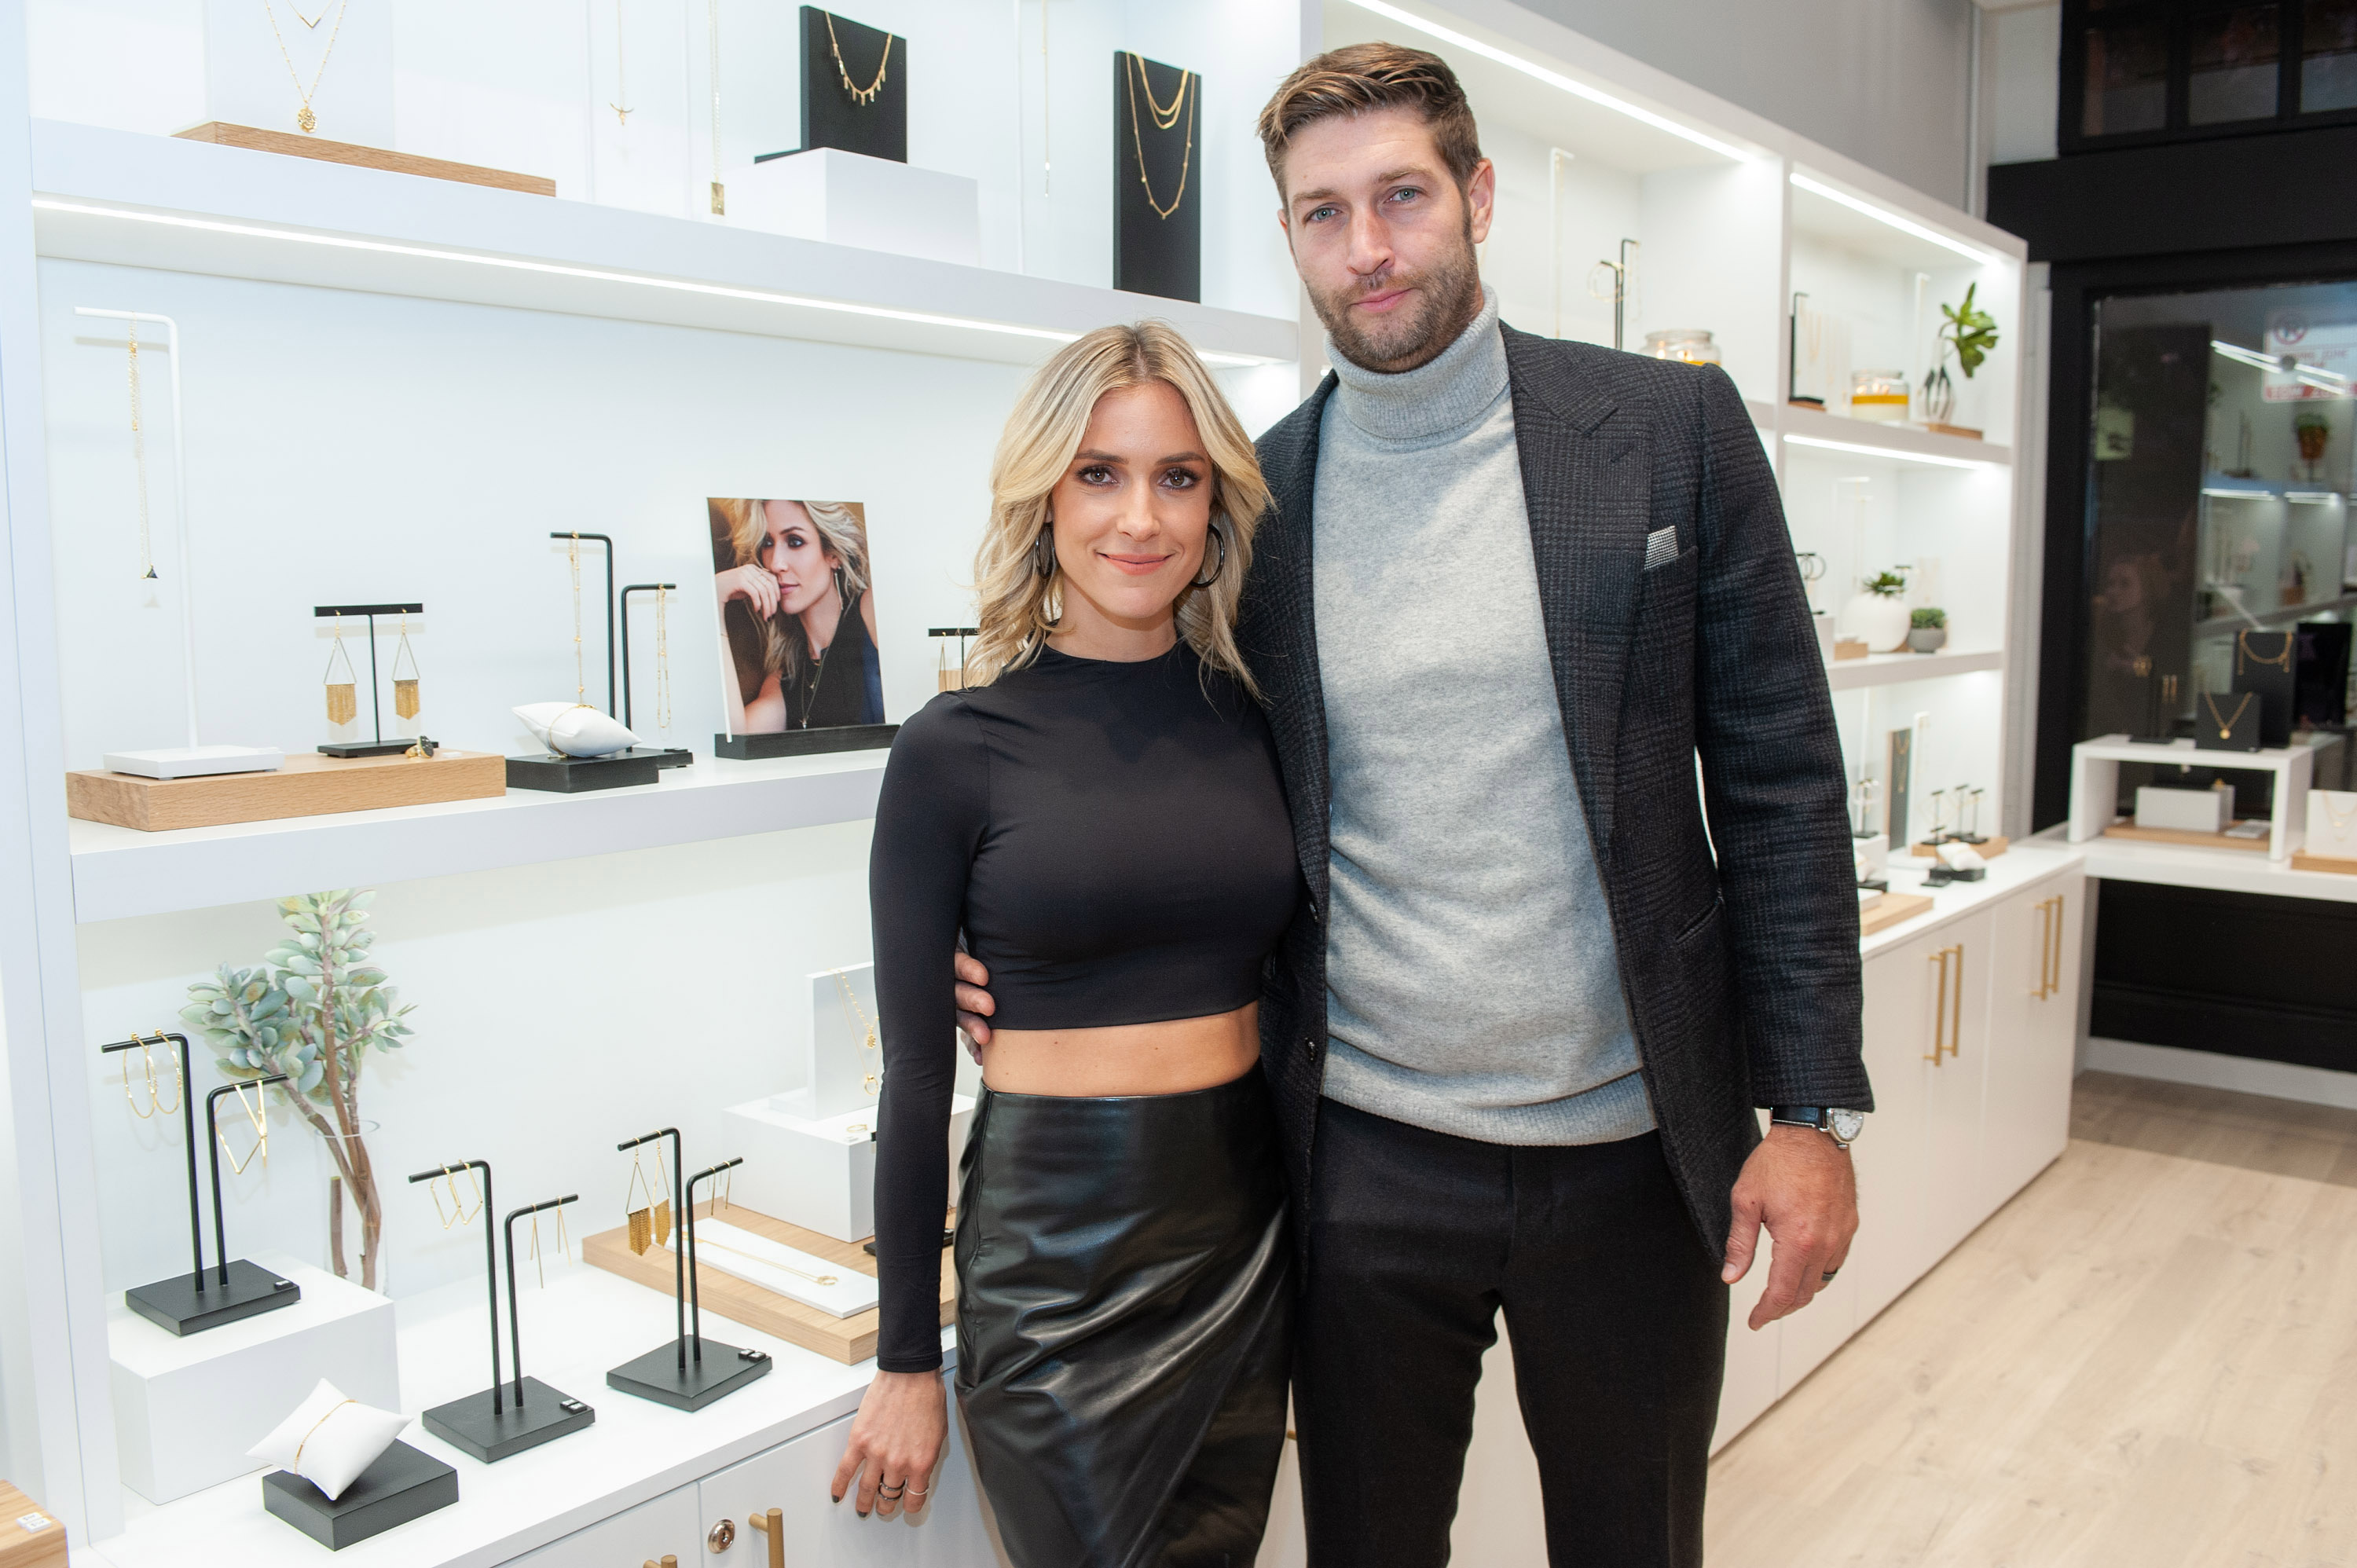 Jay Cutler Gives Kristin Cavallari a Sweet Mother’s Day Shout-Out Amid Divorce